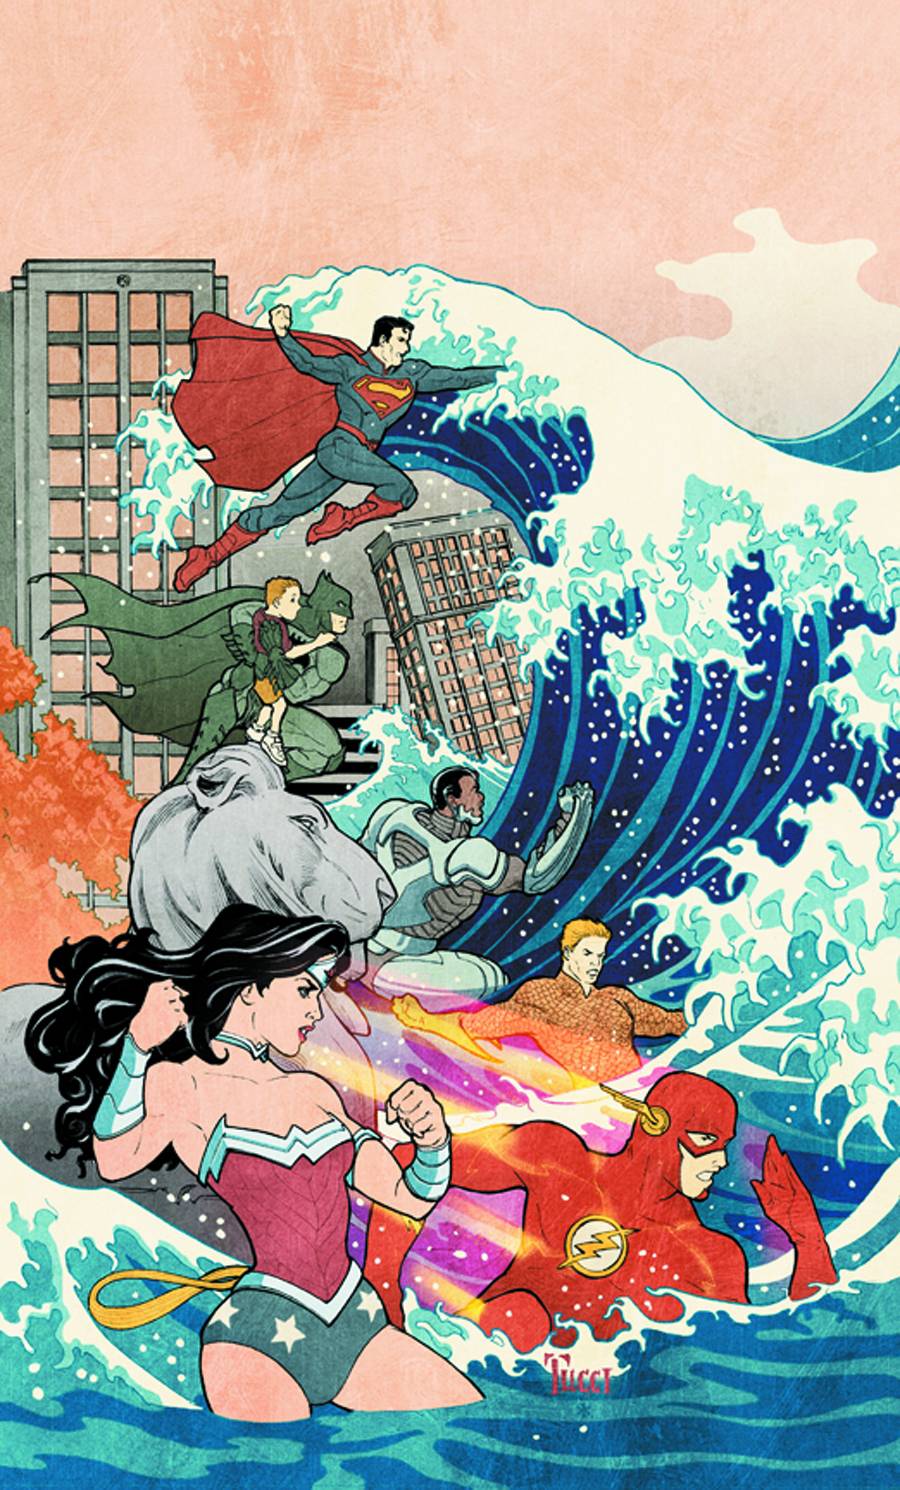 Japanese Style Justice League Art By Shi Creator Billy Tucci